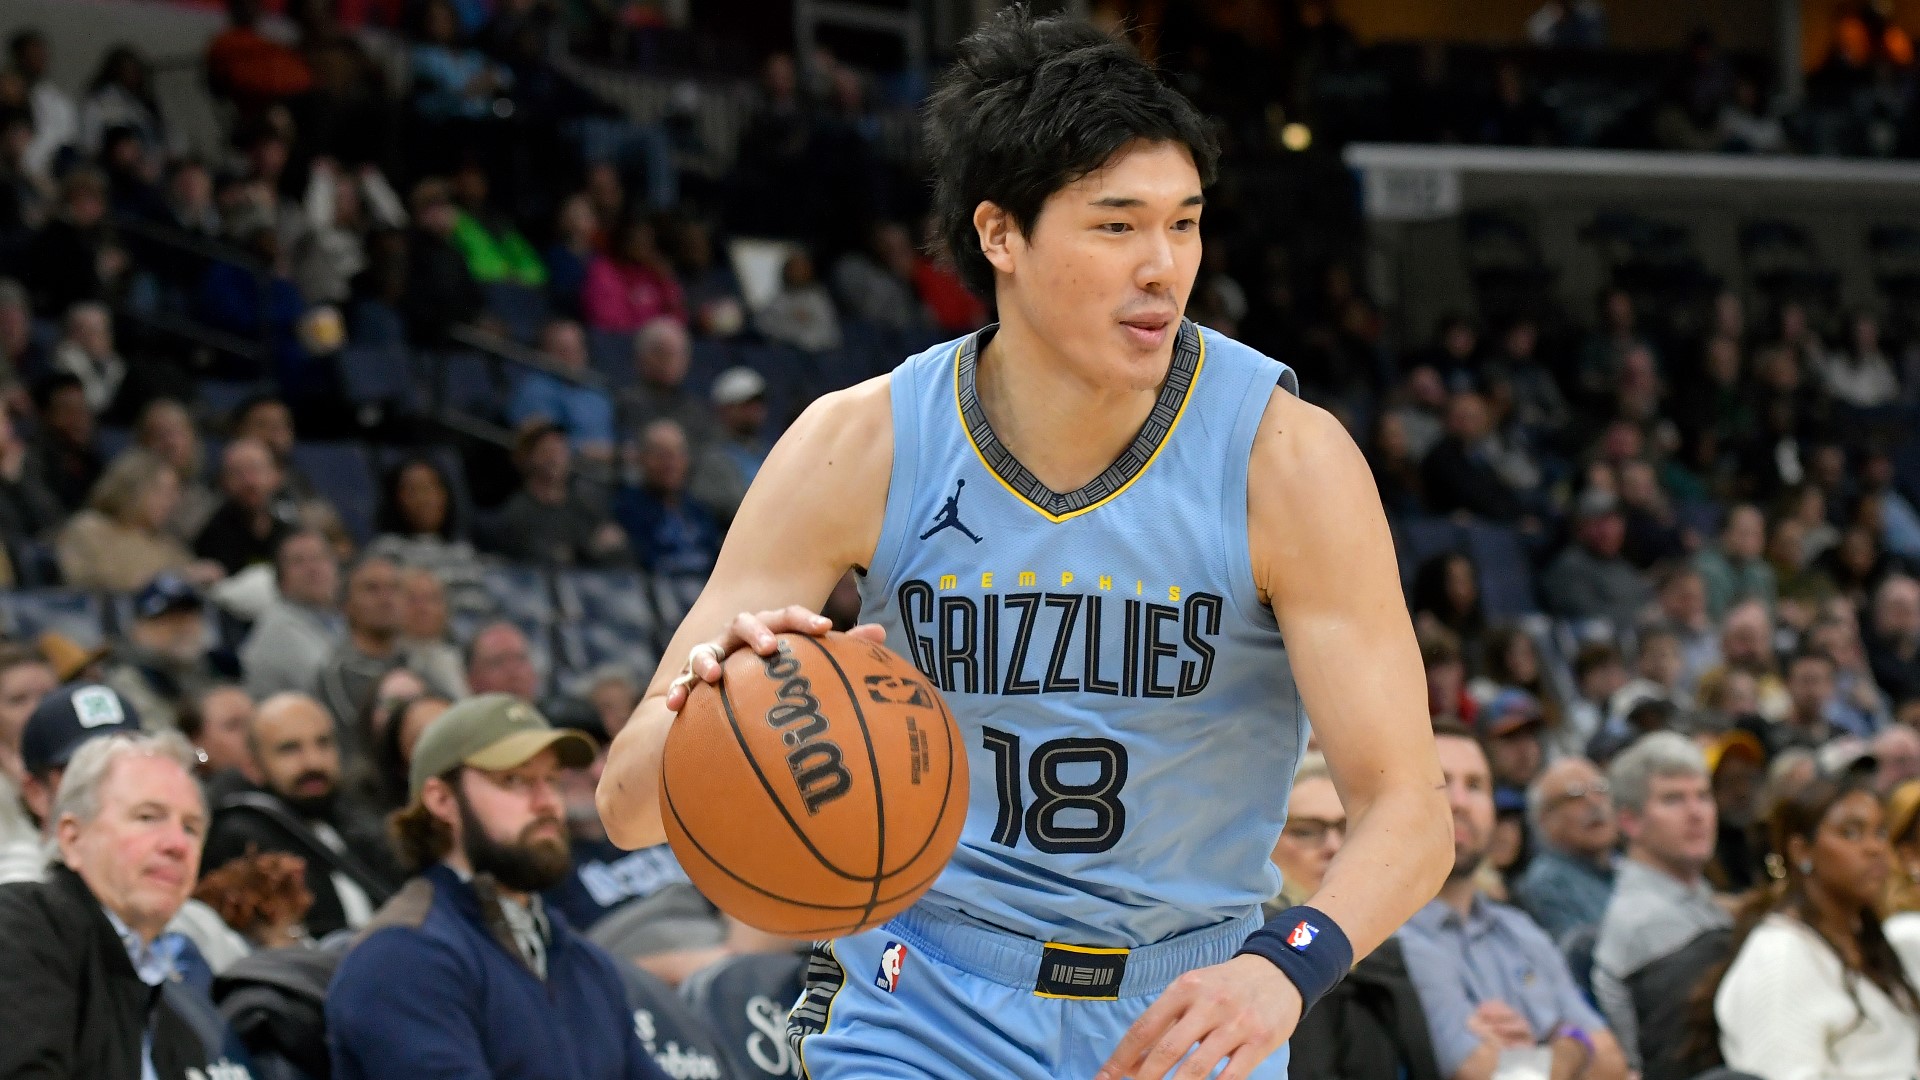 One player who can benefit from a down Grizzlies season is new to some, and familiar to others: Yuta Watanabe.